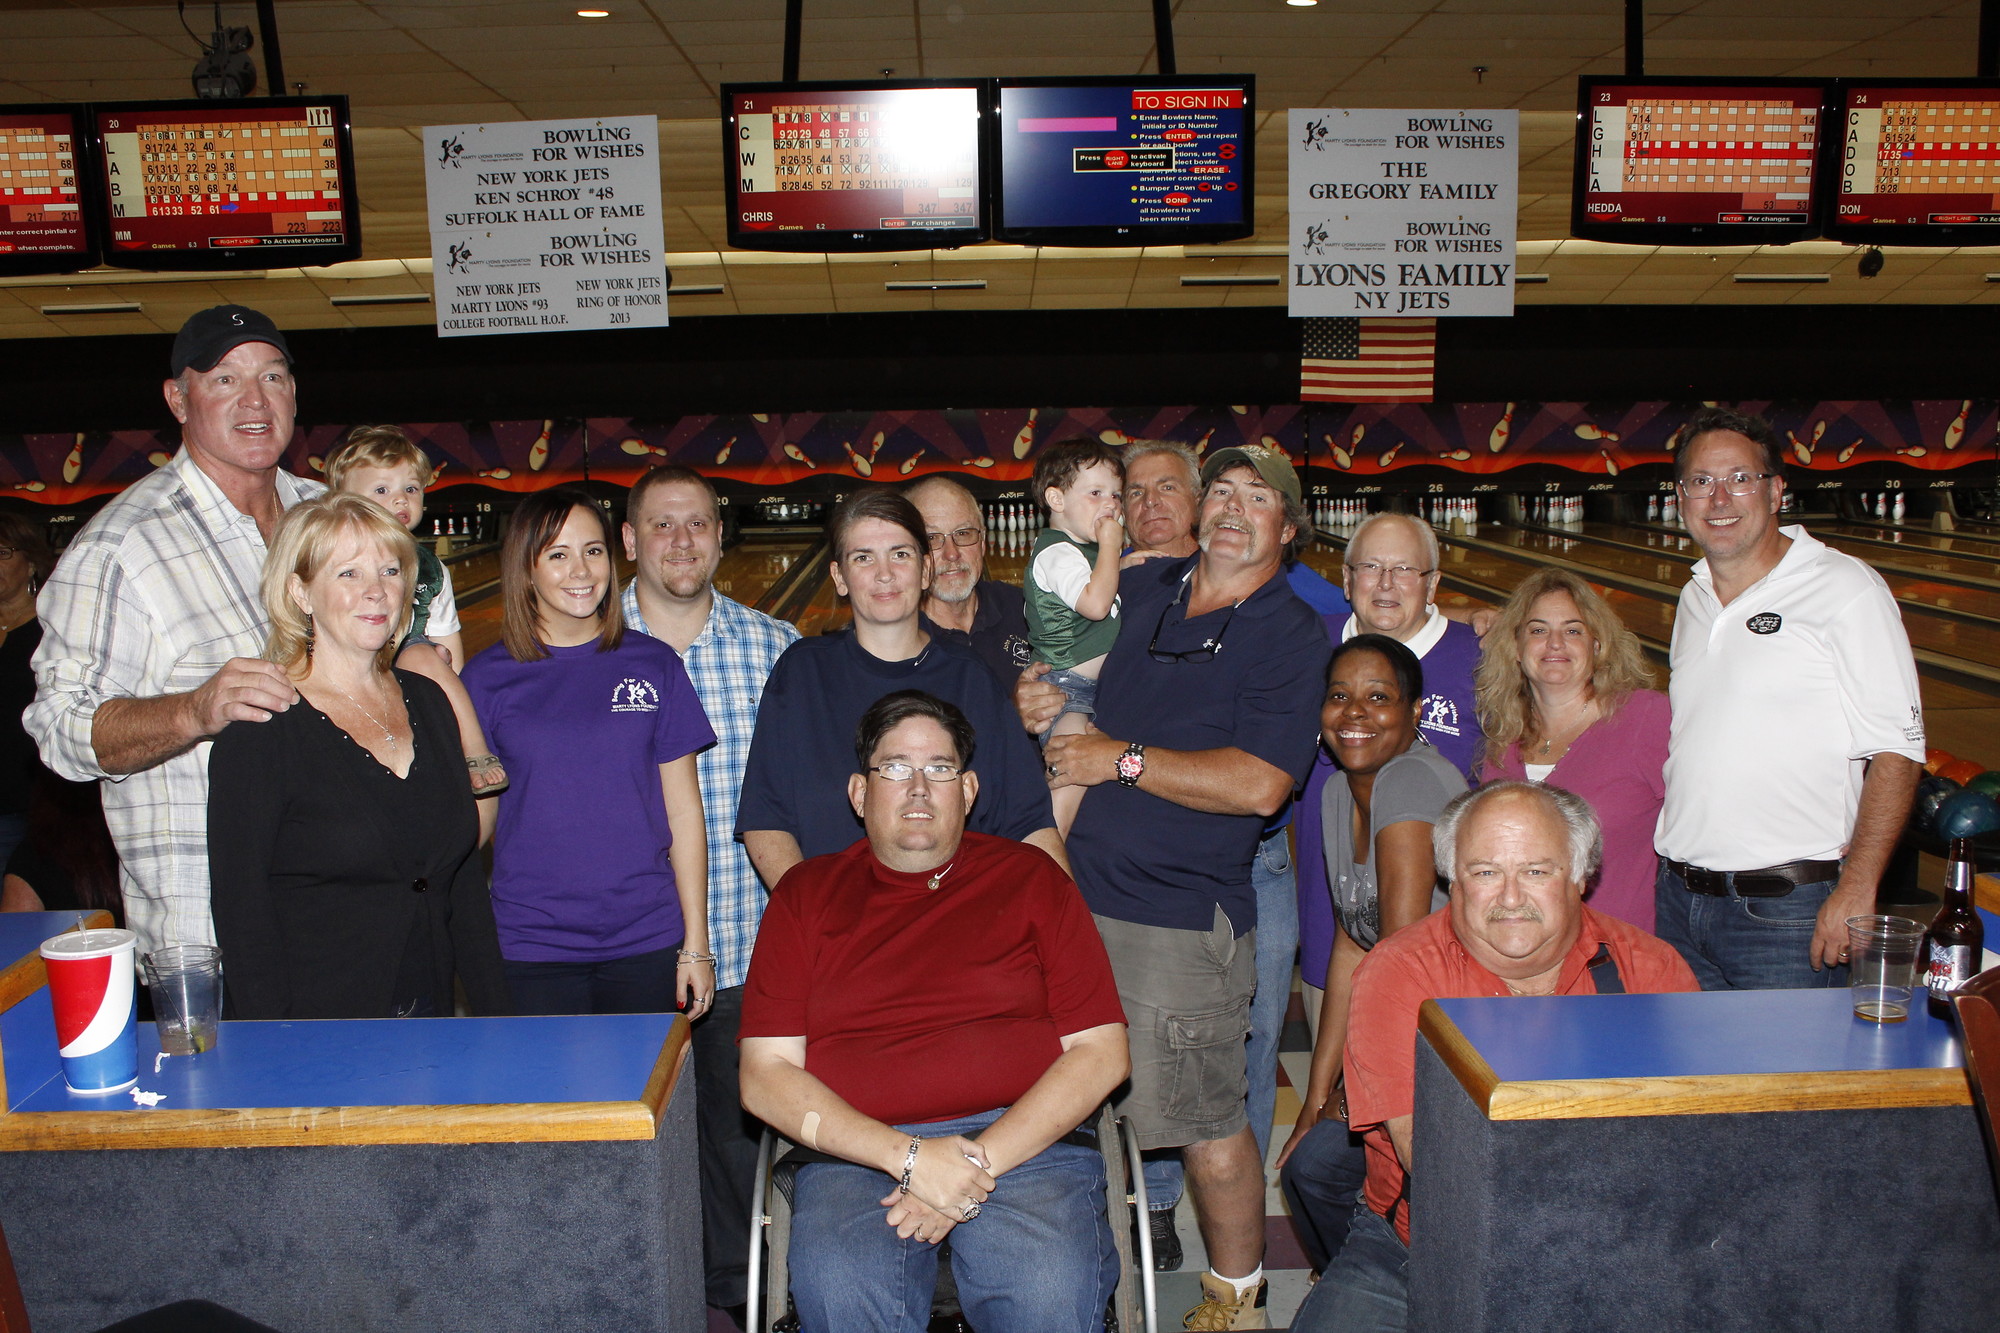 all 48 lanes at AMF Lanes were filled with people raising money for the Marty Lyons Foundation.